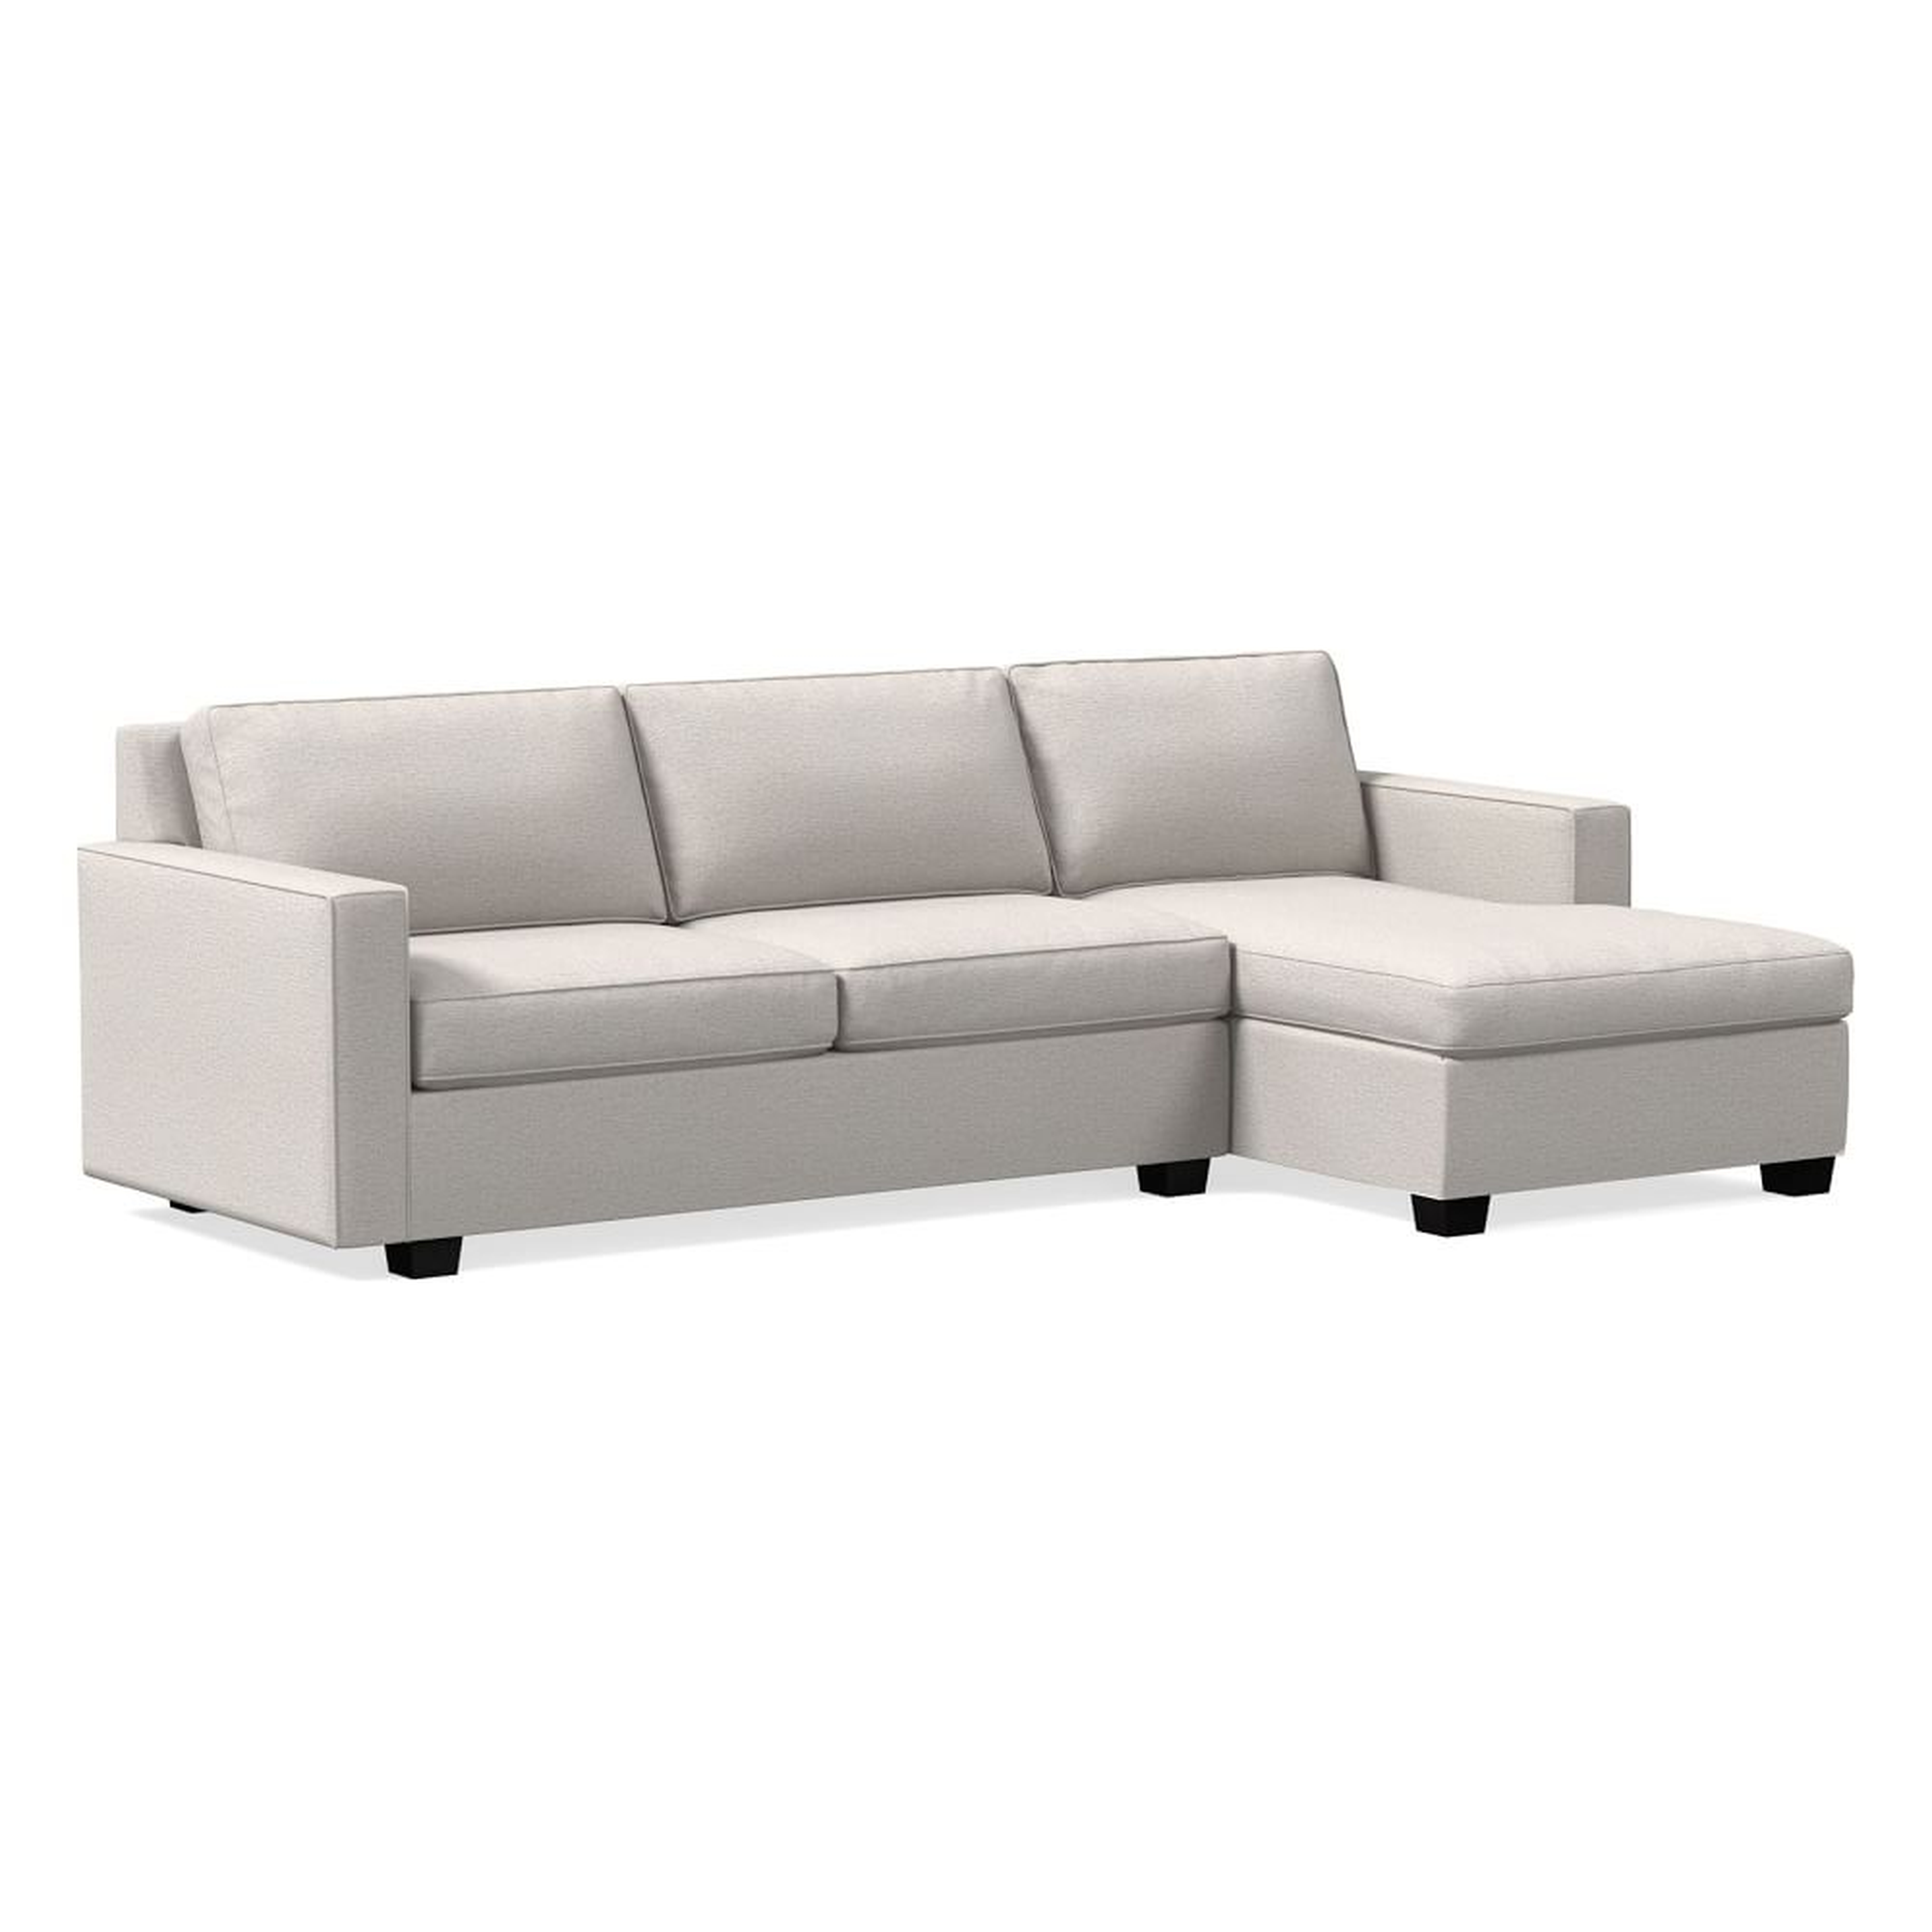 Henry Sectional Set 14: Left Arm Loveseat, Right Arm Chaise, Poly, Twill, Sand, Chocolate - West Elm